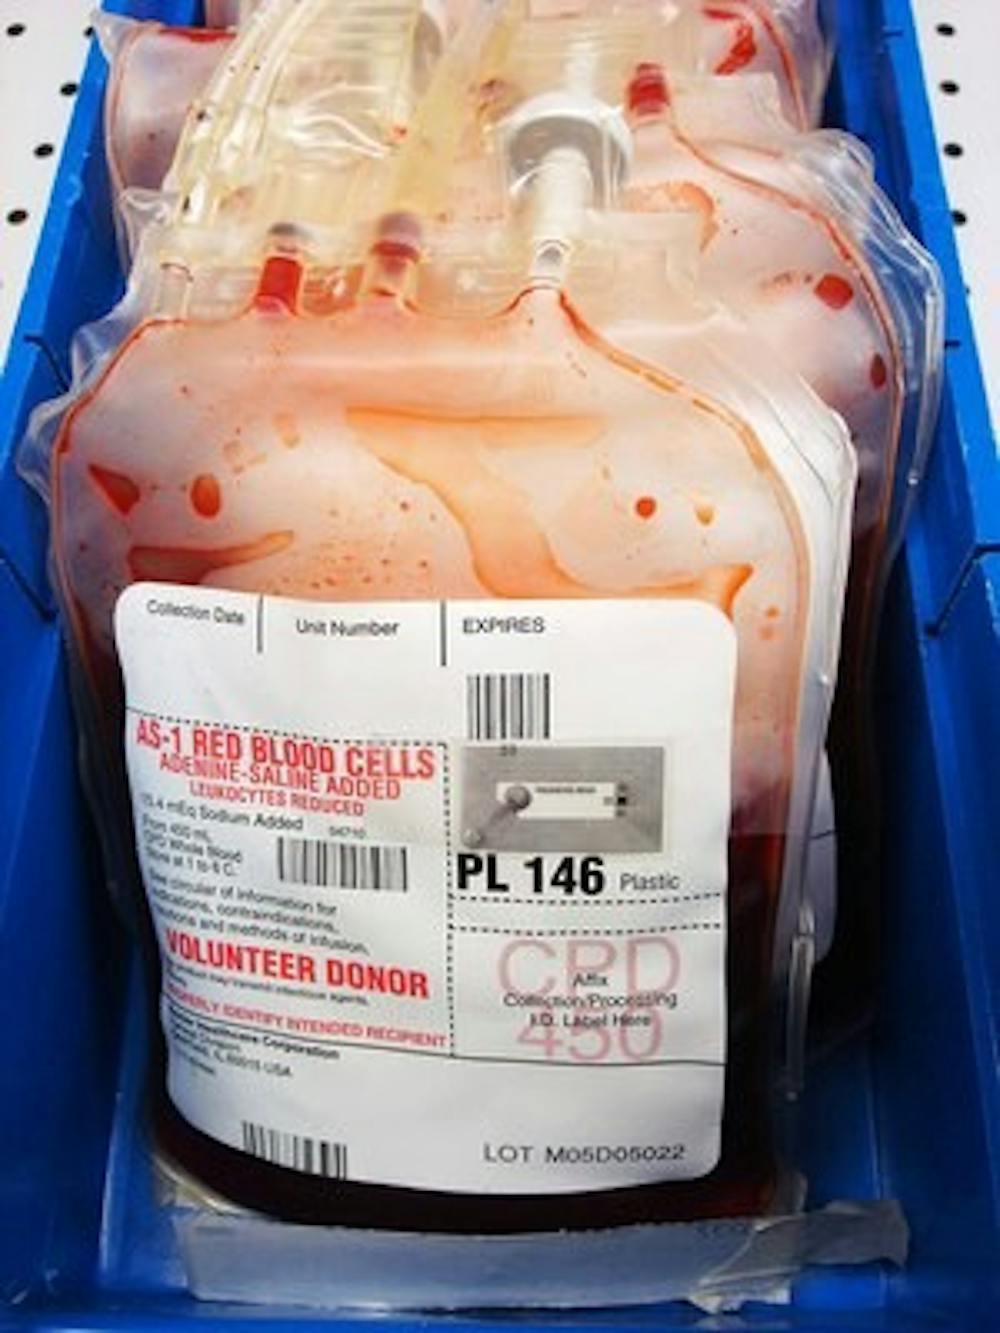 Tracking the nation's blood supply